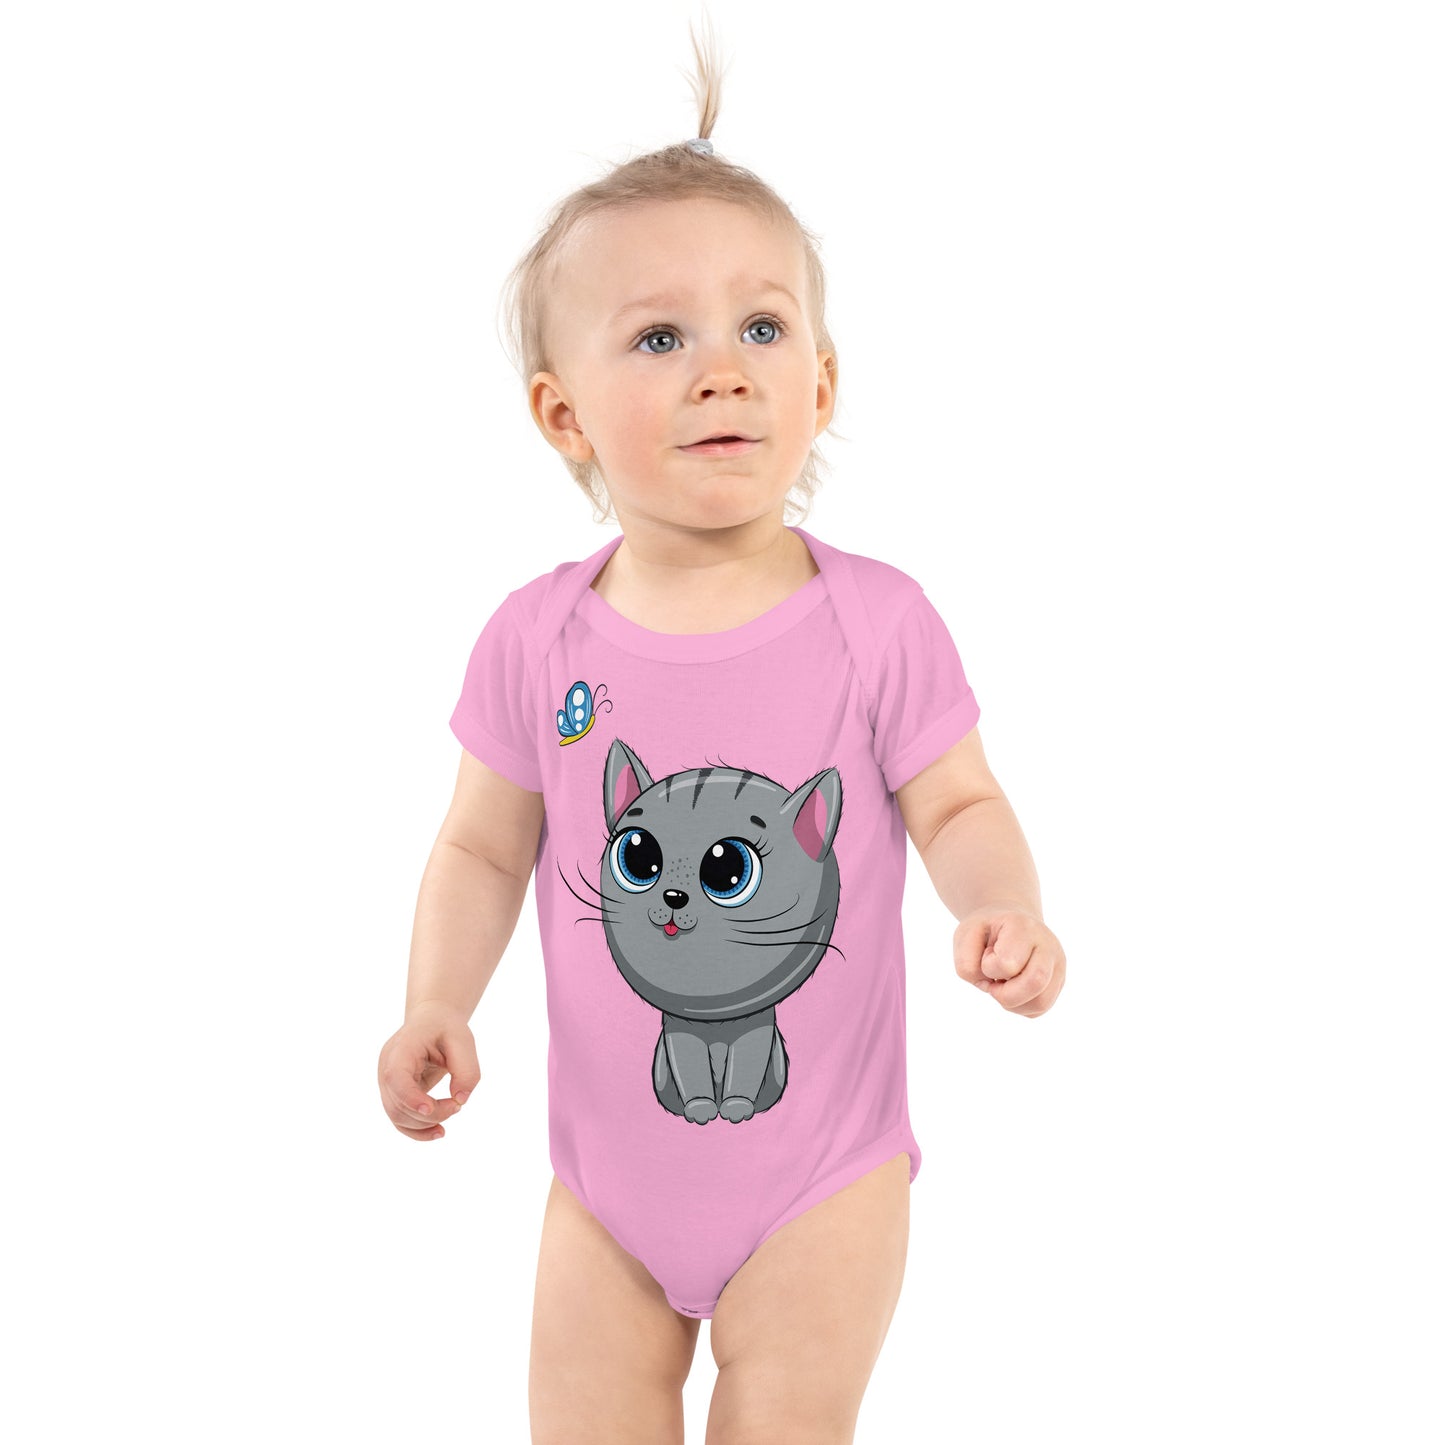 Cute Baby Cat with Butterfly Bodysuit, No. 0140